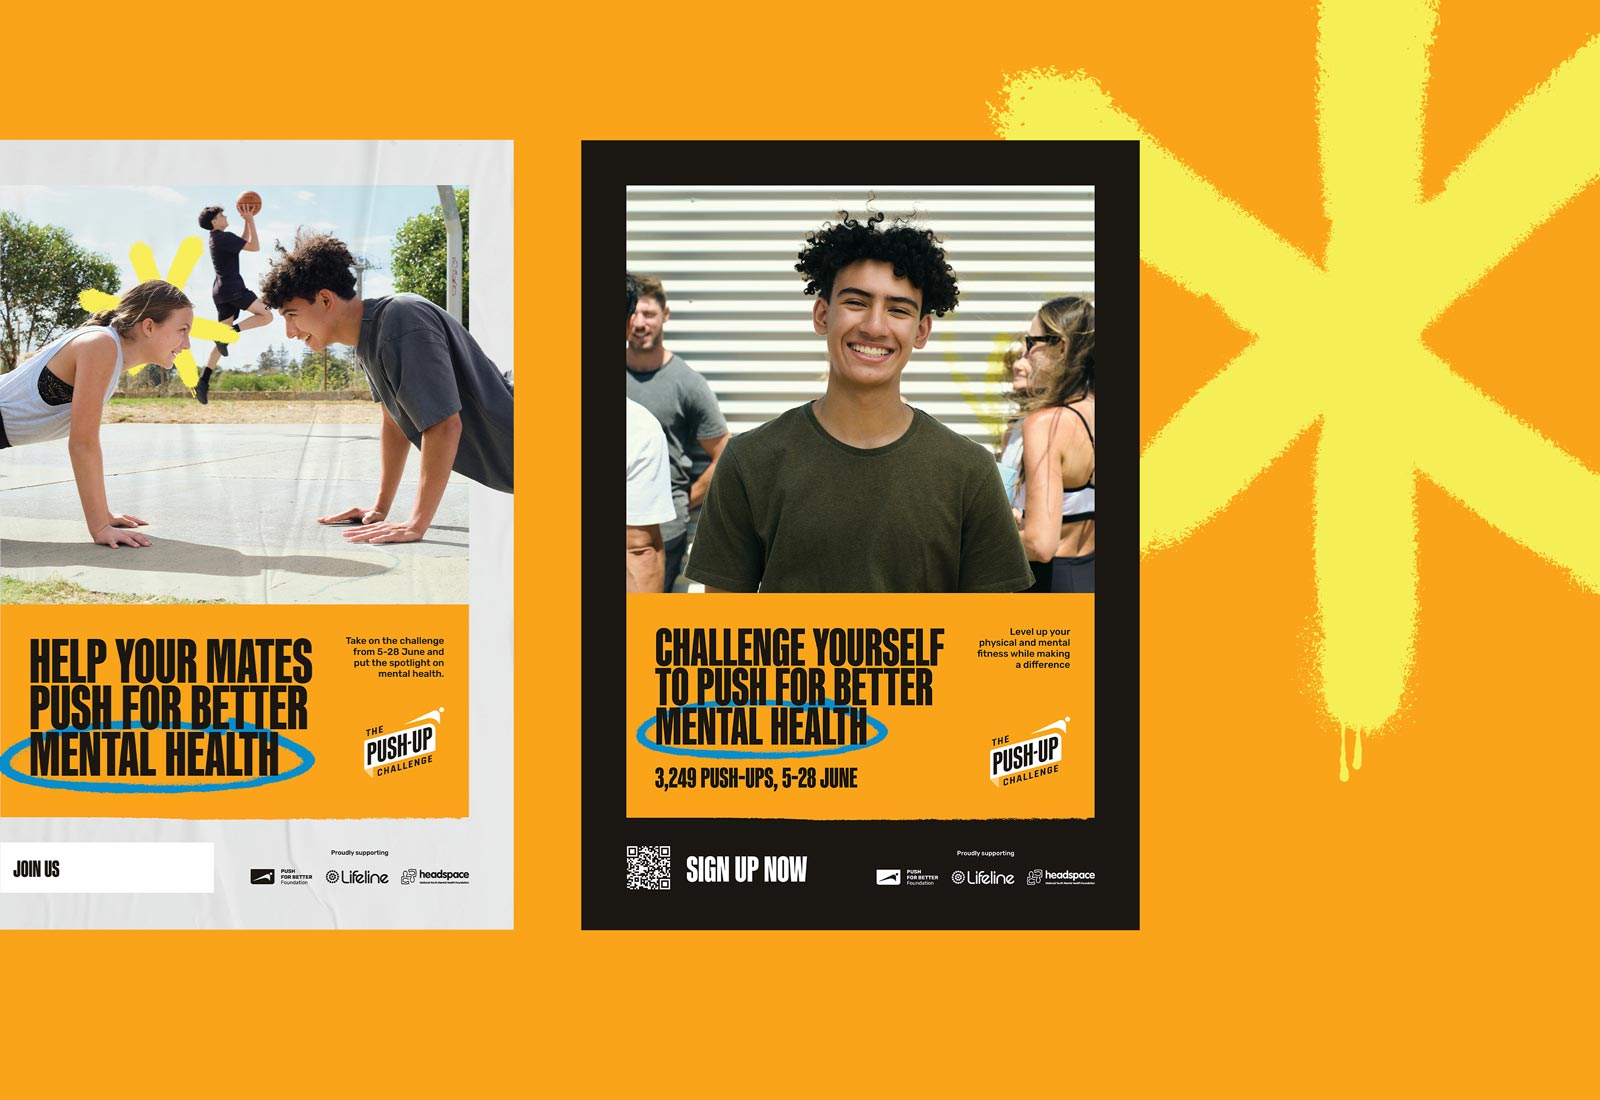 The Push-Up Challenge branded posters